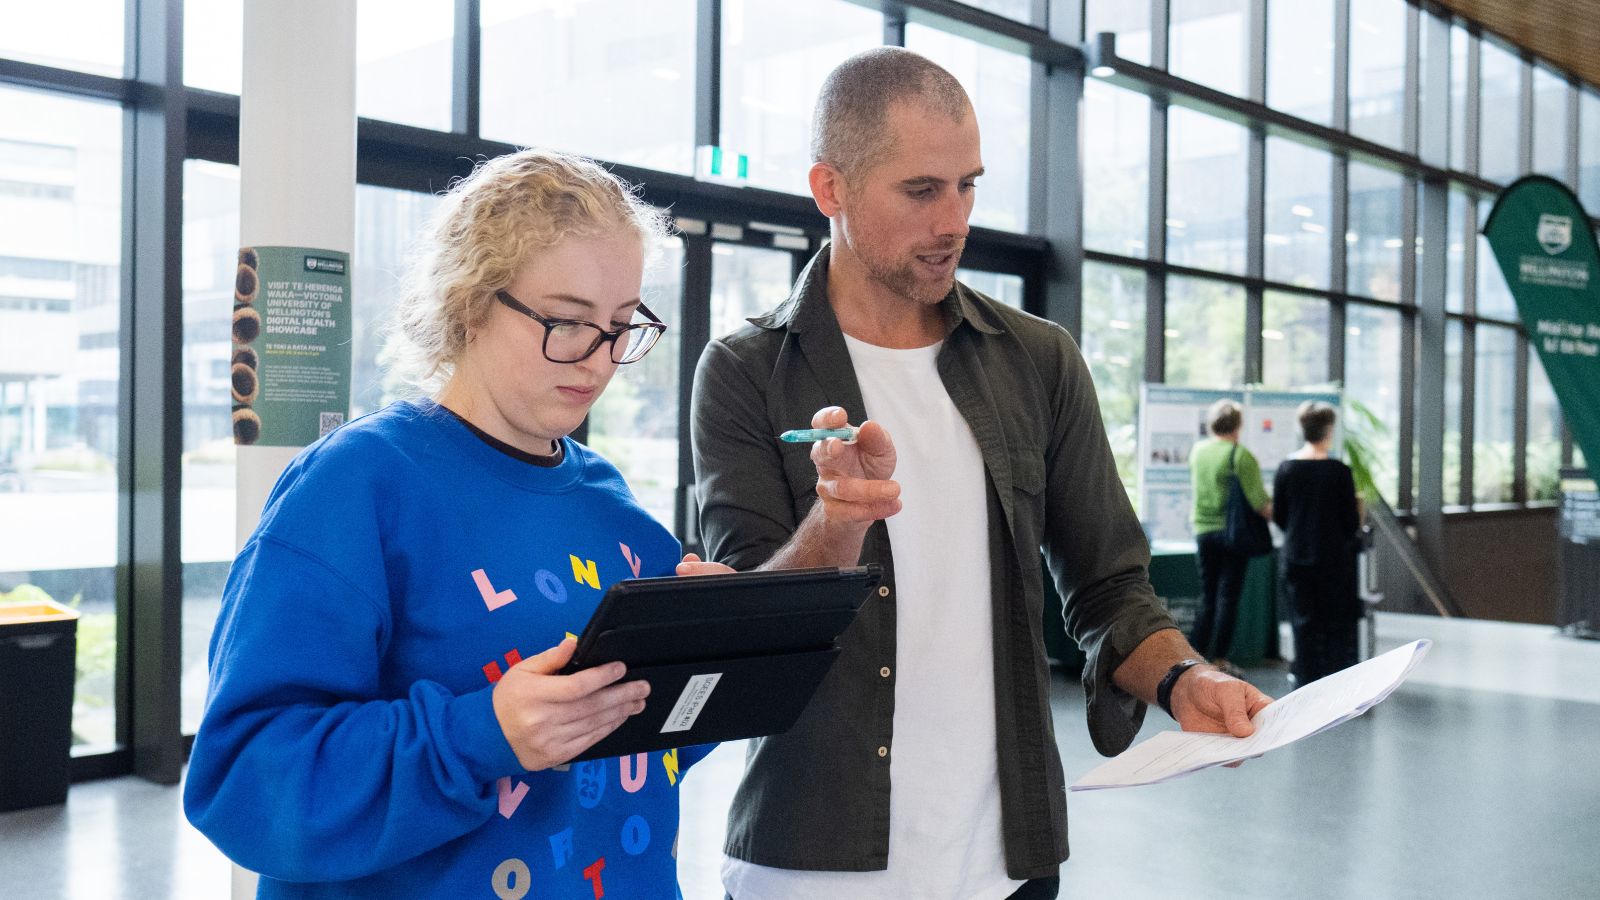 A man stands next to young woman. The young woman is holding a tablet device and looking intently at it. The man is gesturing with his hands while holding a pen and reading a piece of paper. It looks like he is explaining how something works to her.